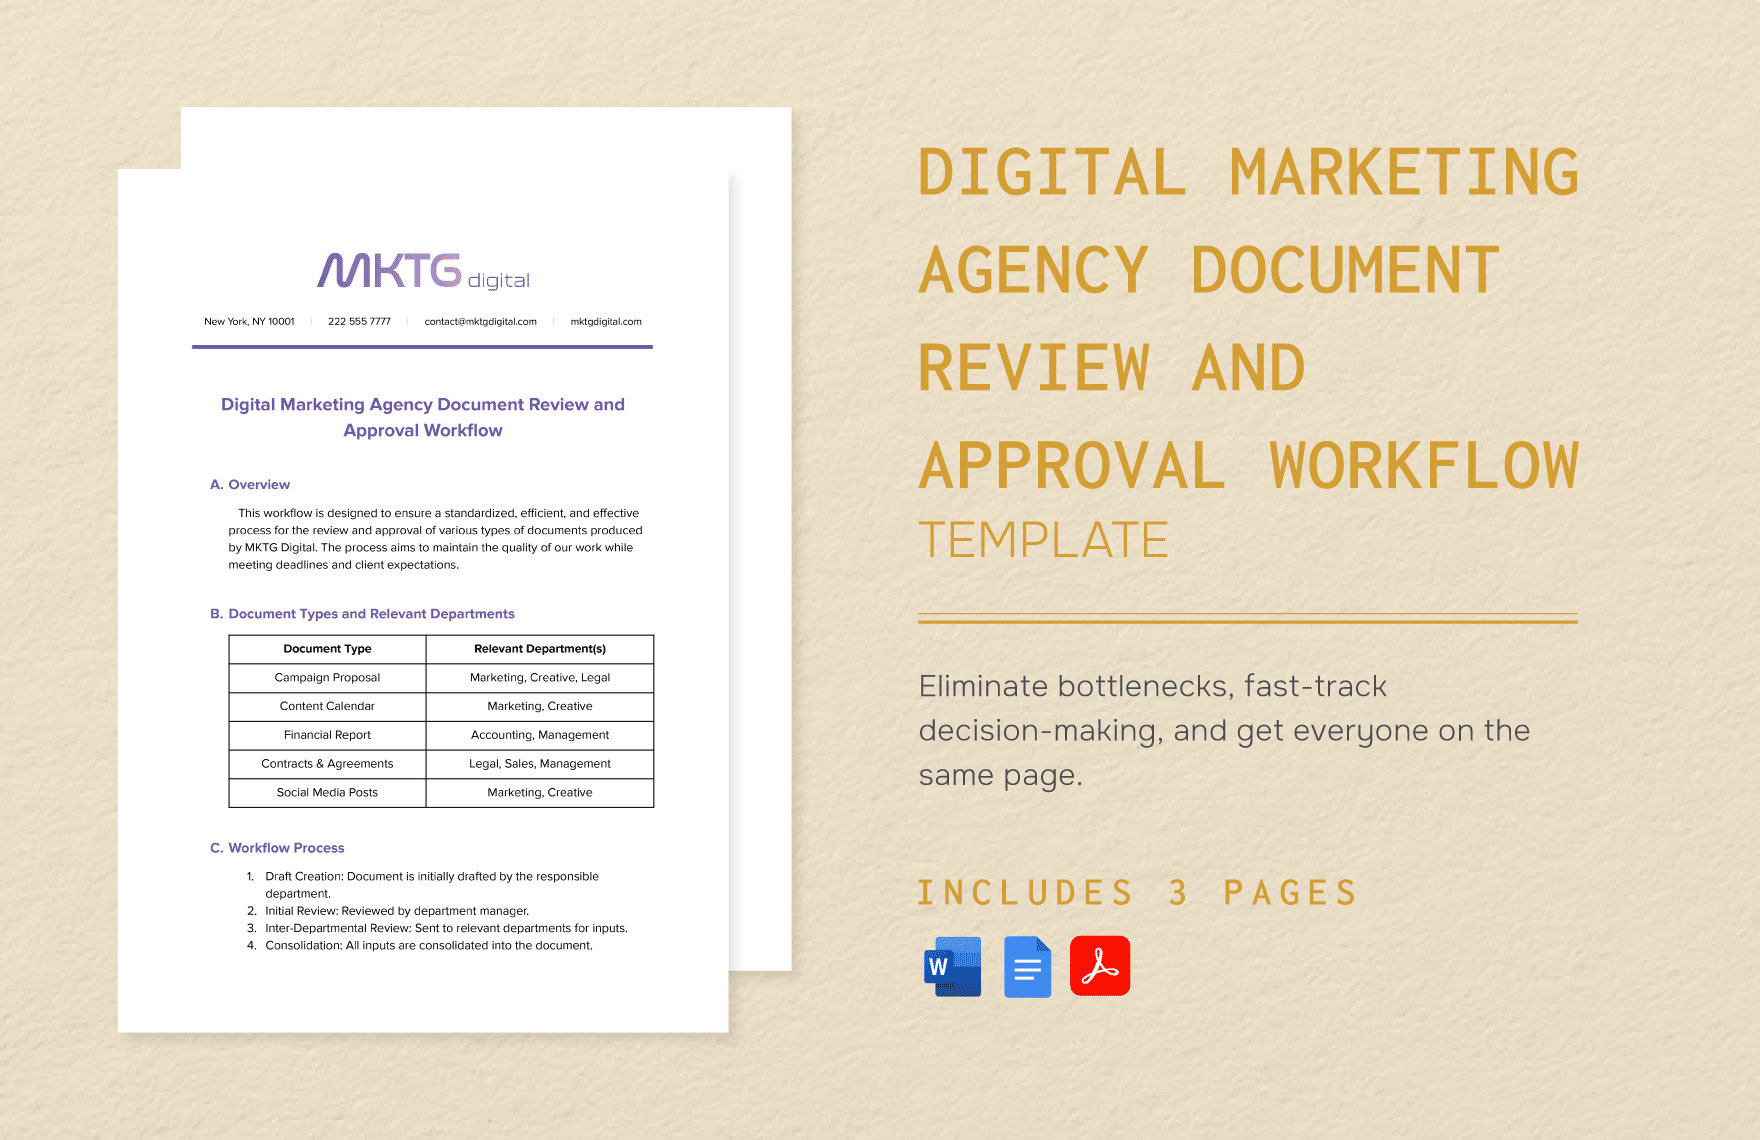 Digital Marketing Agency Document Review and Approval Workflow Template